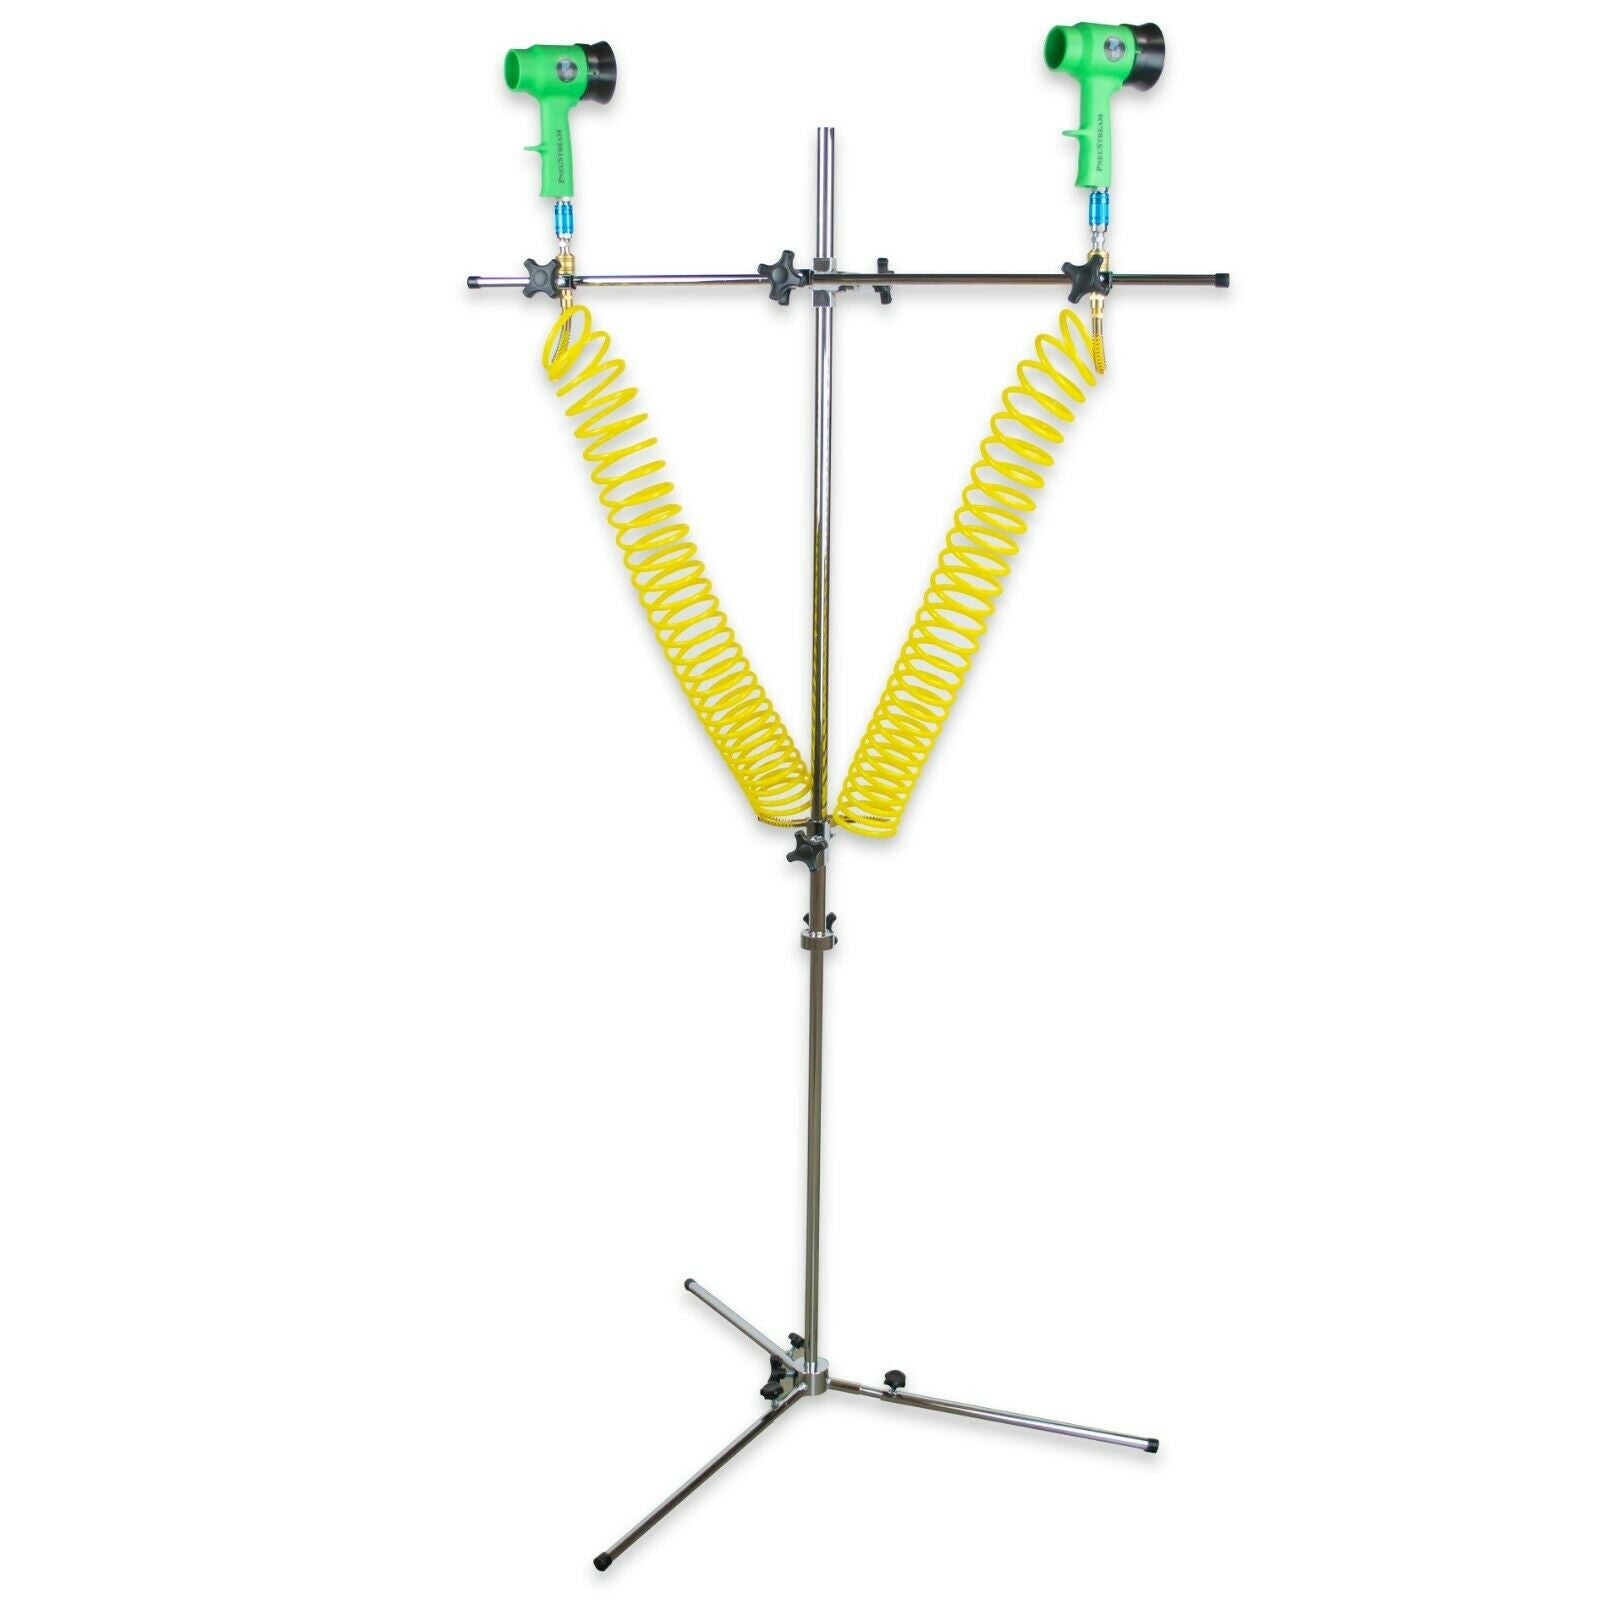 Waterborne Paint Air Dryer System with Stand and 2 Composite Air Dryer Guns